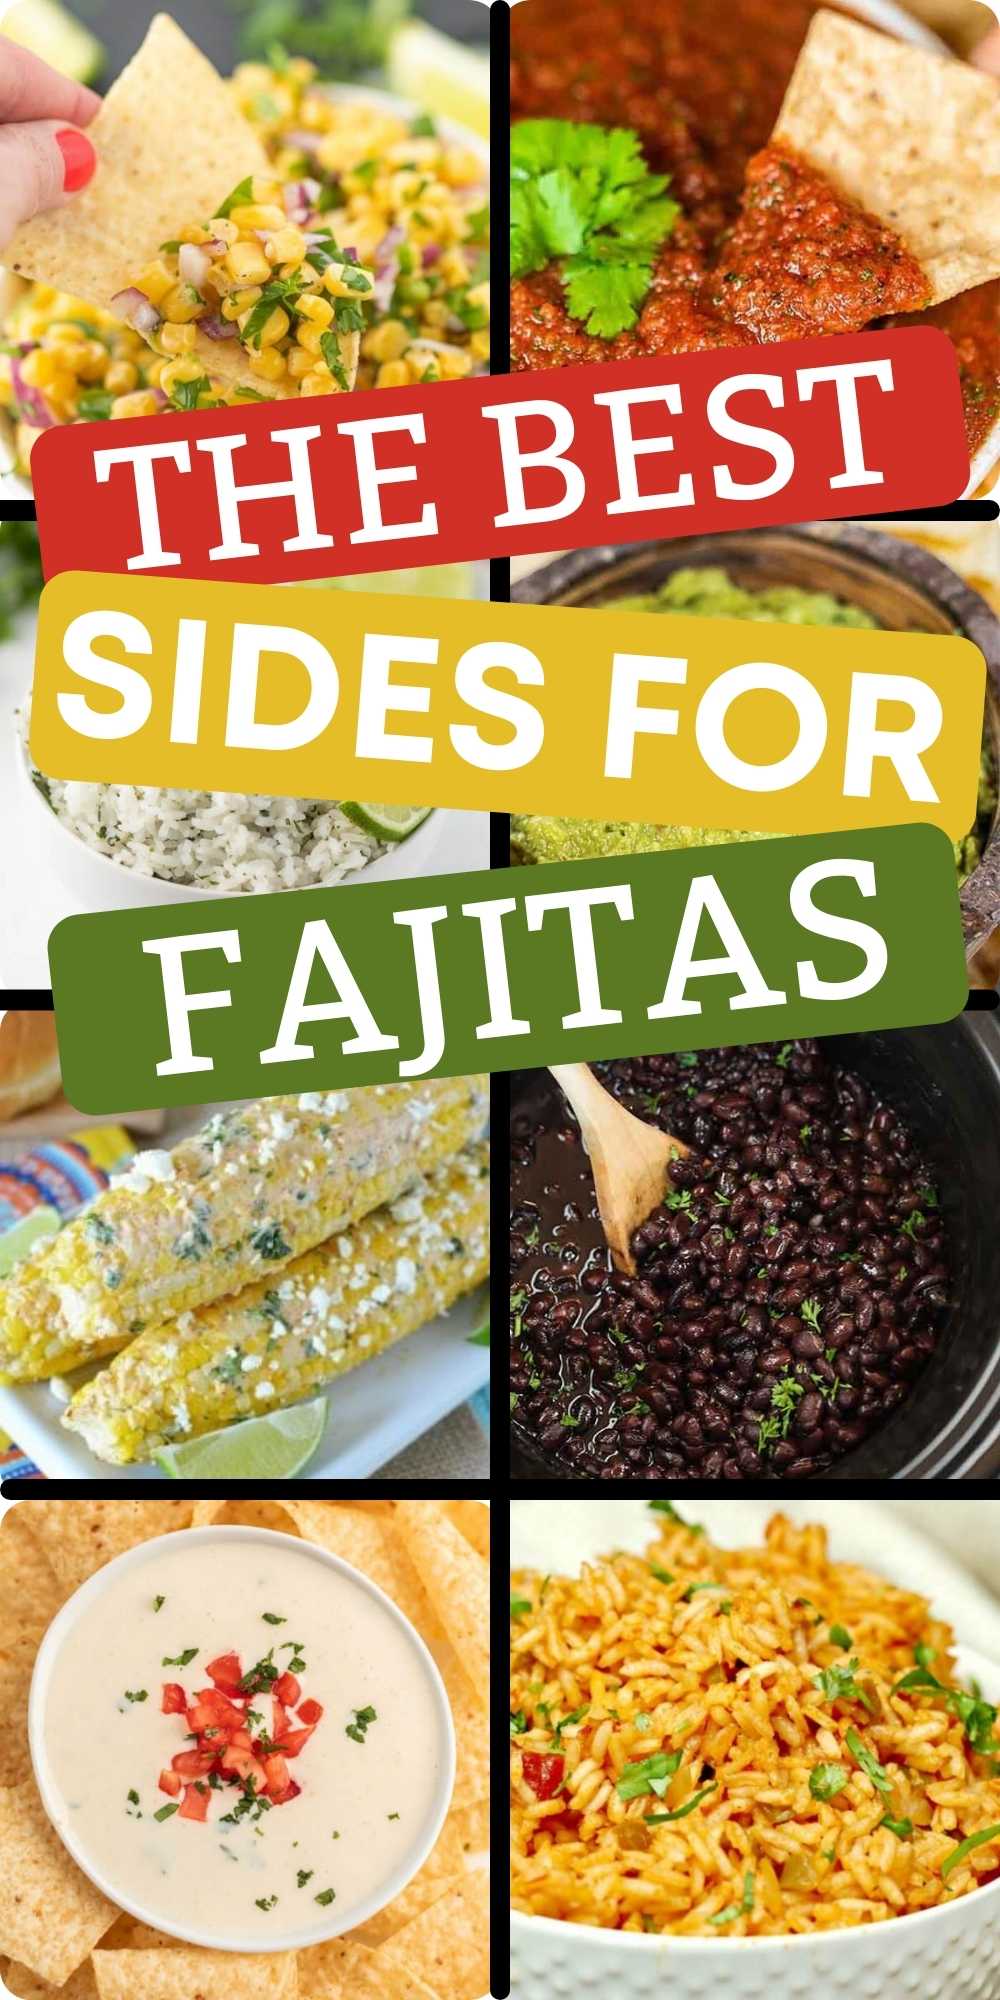 25 Sides for Fajitas that are perfect for busy weeknights. These side dishes for fajitas are easy to make, frugal and tasty. You will love these delicious sides for your favorite fajita dinners. #eatingonadime #sidedishes #fajitasides #fajitas 
